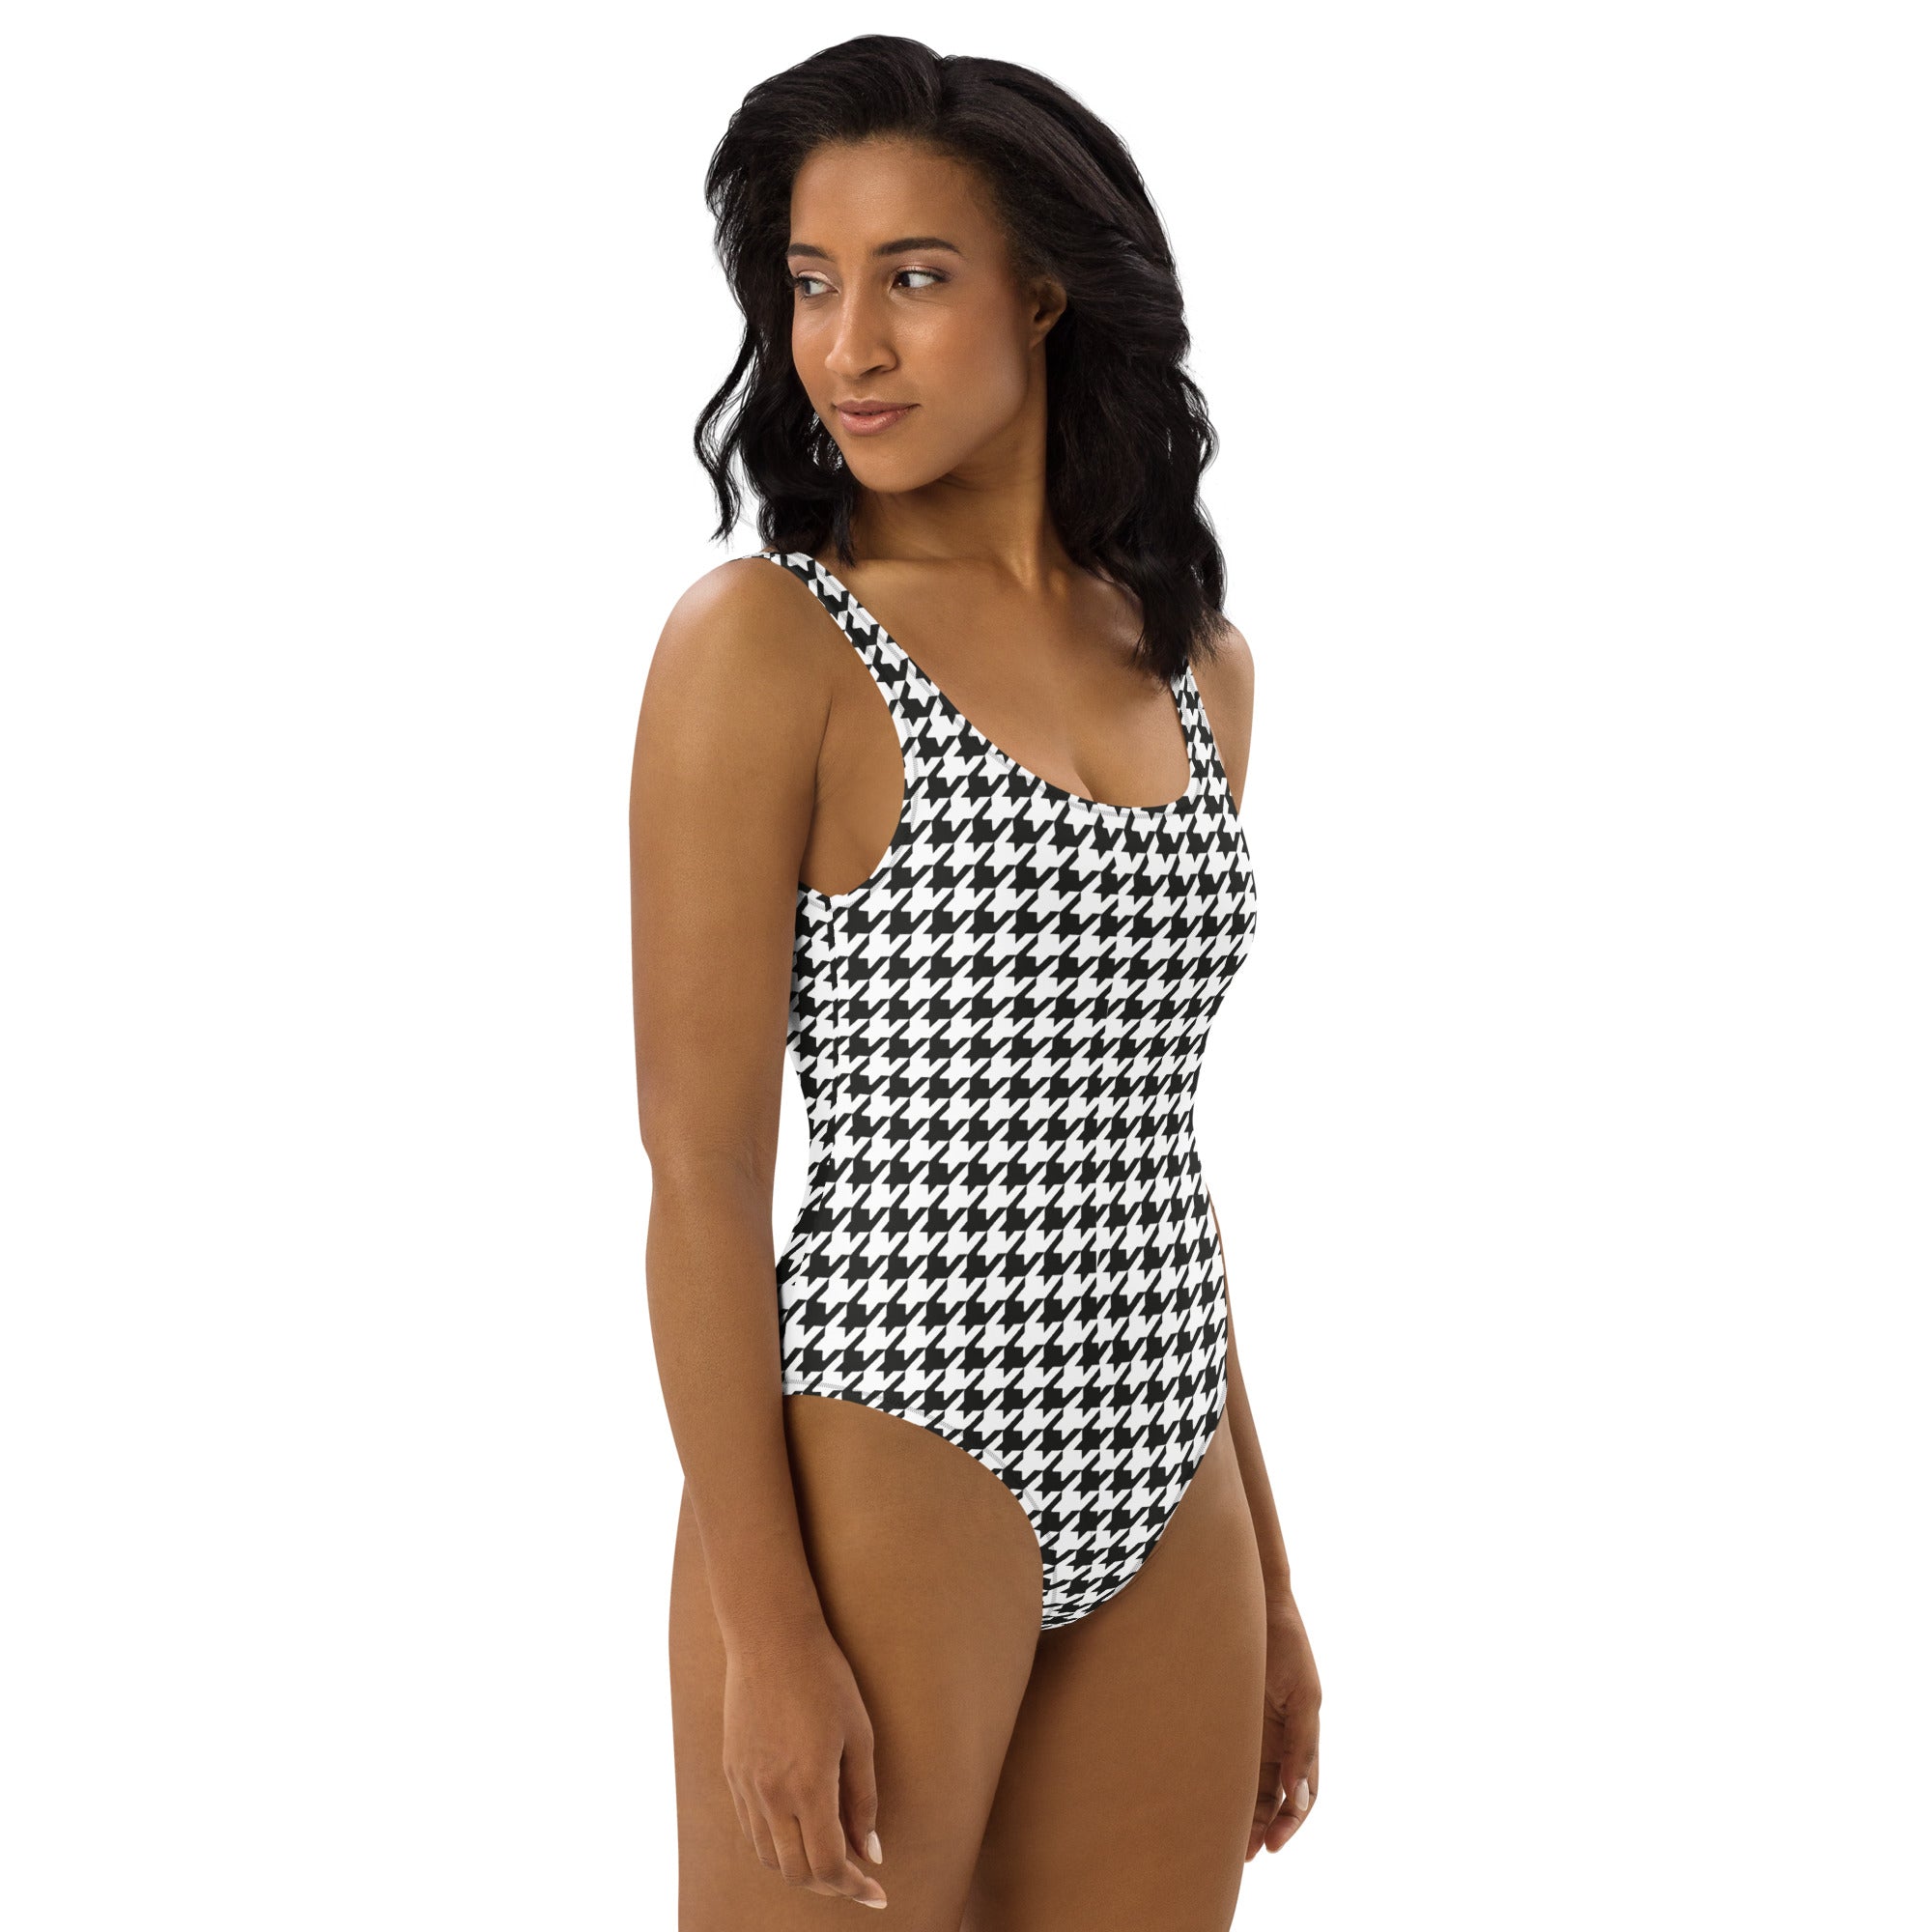 Black & White Houndstooth Print One-Piece Swimsuit